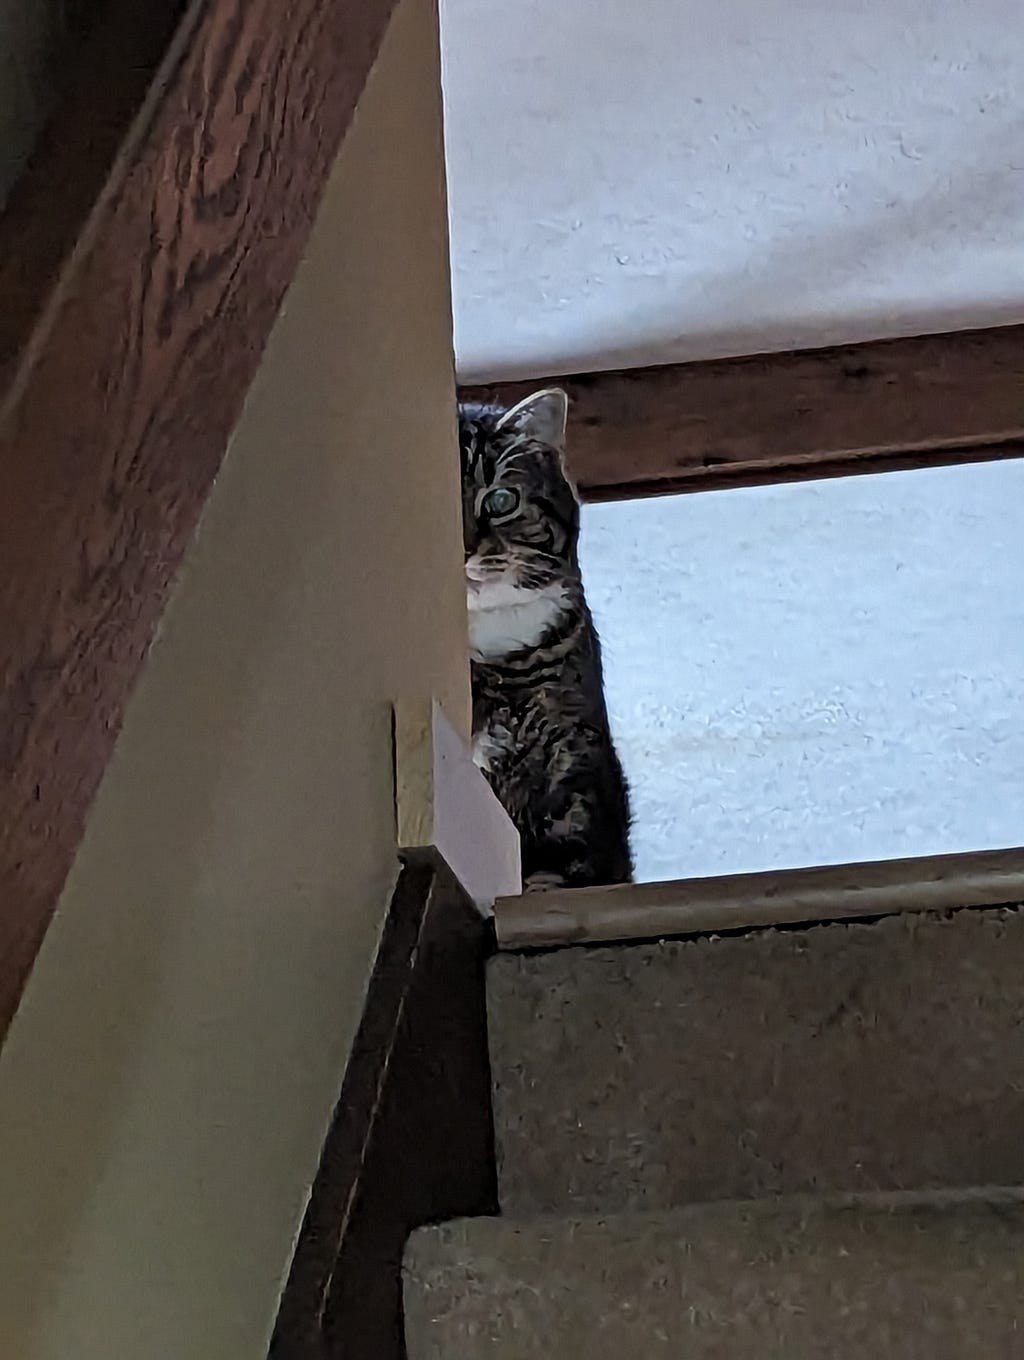 Buddy the Cat giving a death stare from the top of the stairs.